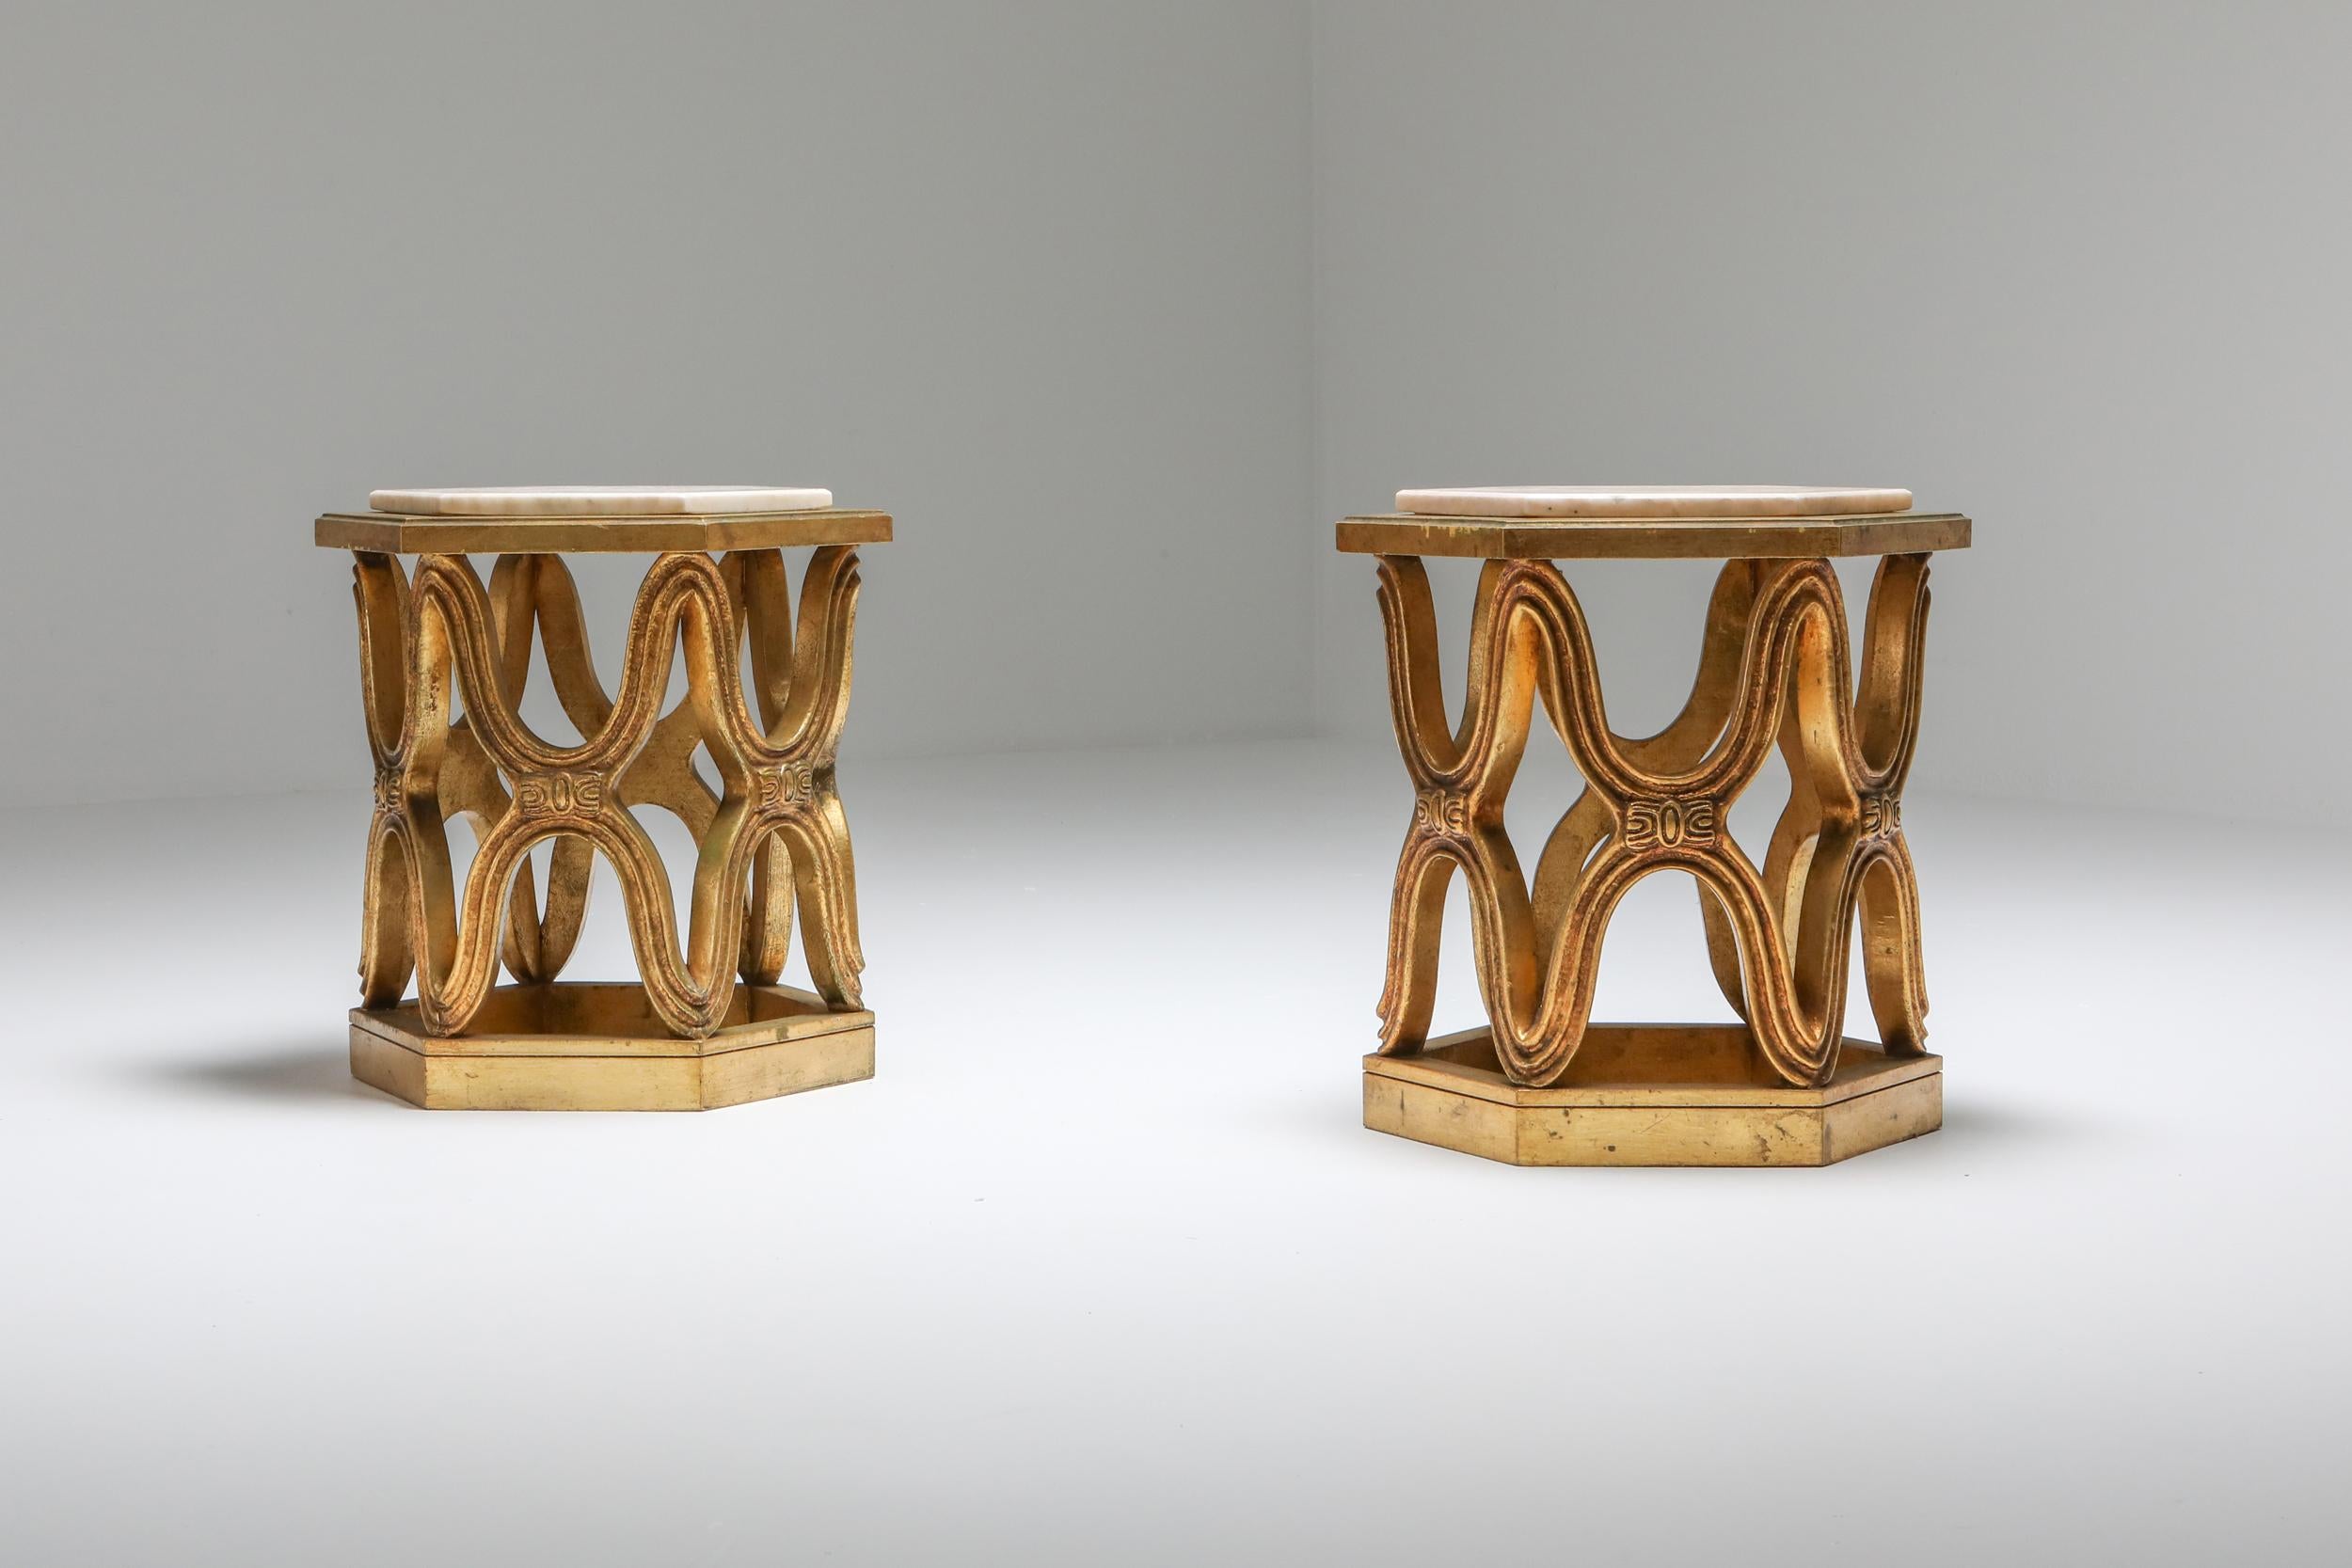 Giltwood and marble side table set, Hollywood Regency, 1970s

Would fit well in an eclectic Hollywood Regency inspired decor.
Measures: Ø 42 cm, H 44 cm.
  